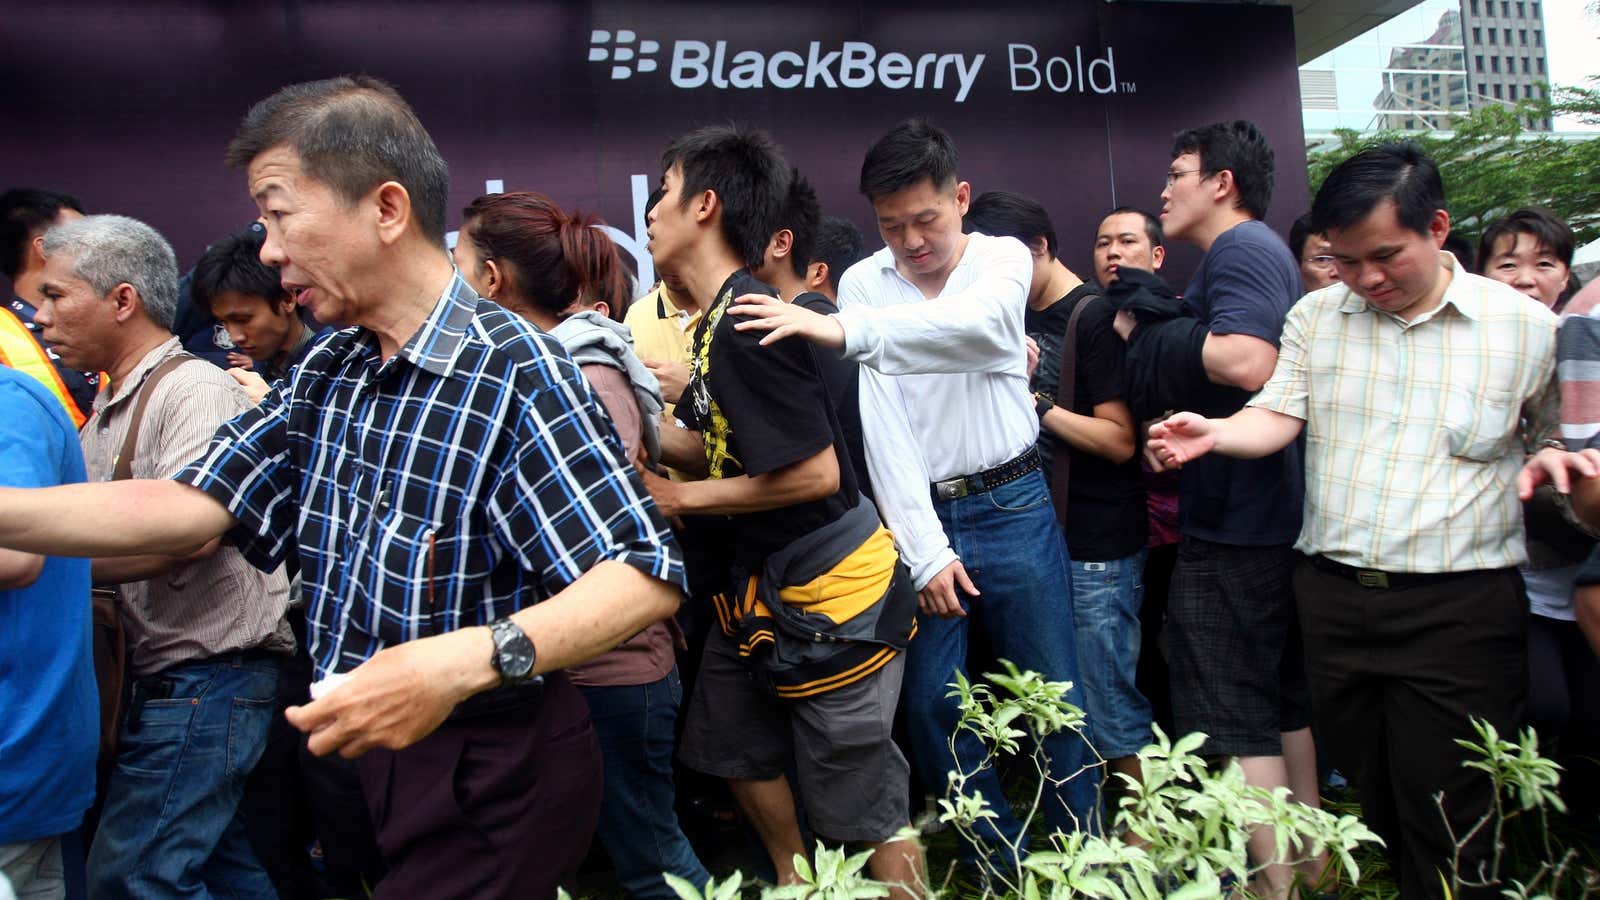 Ah, the heady days when people still jostled to buy BlackBerry’s phones, never mind its shares.